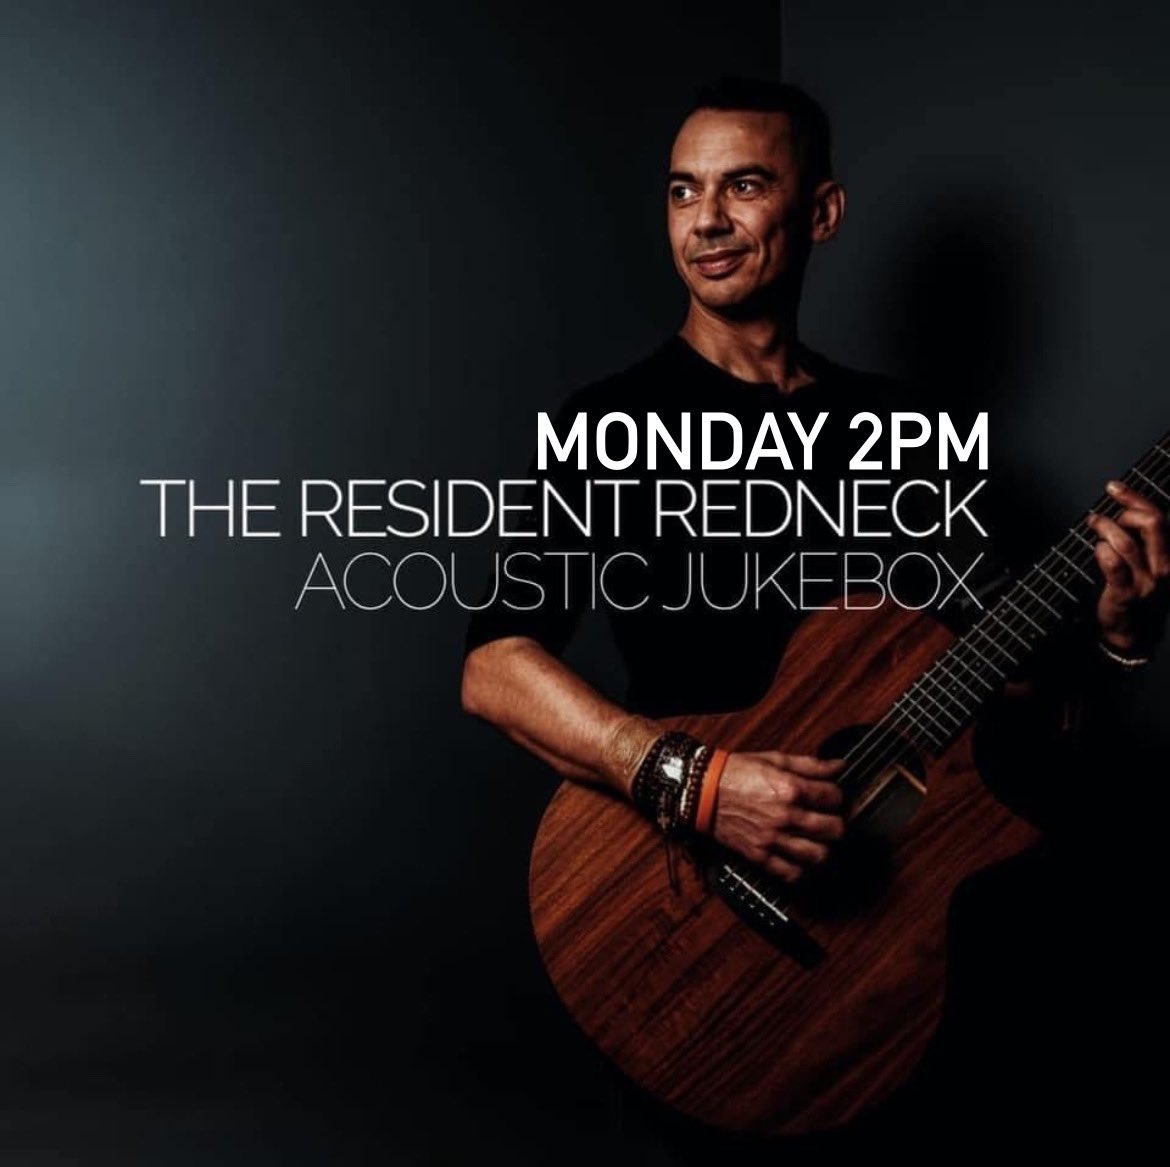 🎸MONDAY MUSIC🕺🏼 Today 2pm The Resident Redneck and his Acoustic Jukebox And don’t forget our Work Day Wind Down (some folk do work bank holidays too!) 10% off your favourite pints🍻wines🍷or enjoy 2 of our hand crafted cocktails for £8* Great ale🍻 Great Music🎸 Great Times🕺🏼